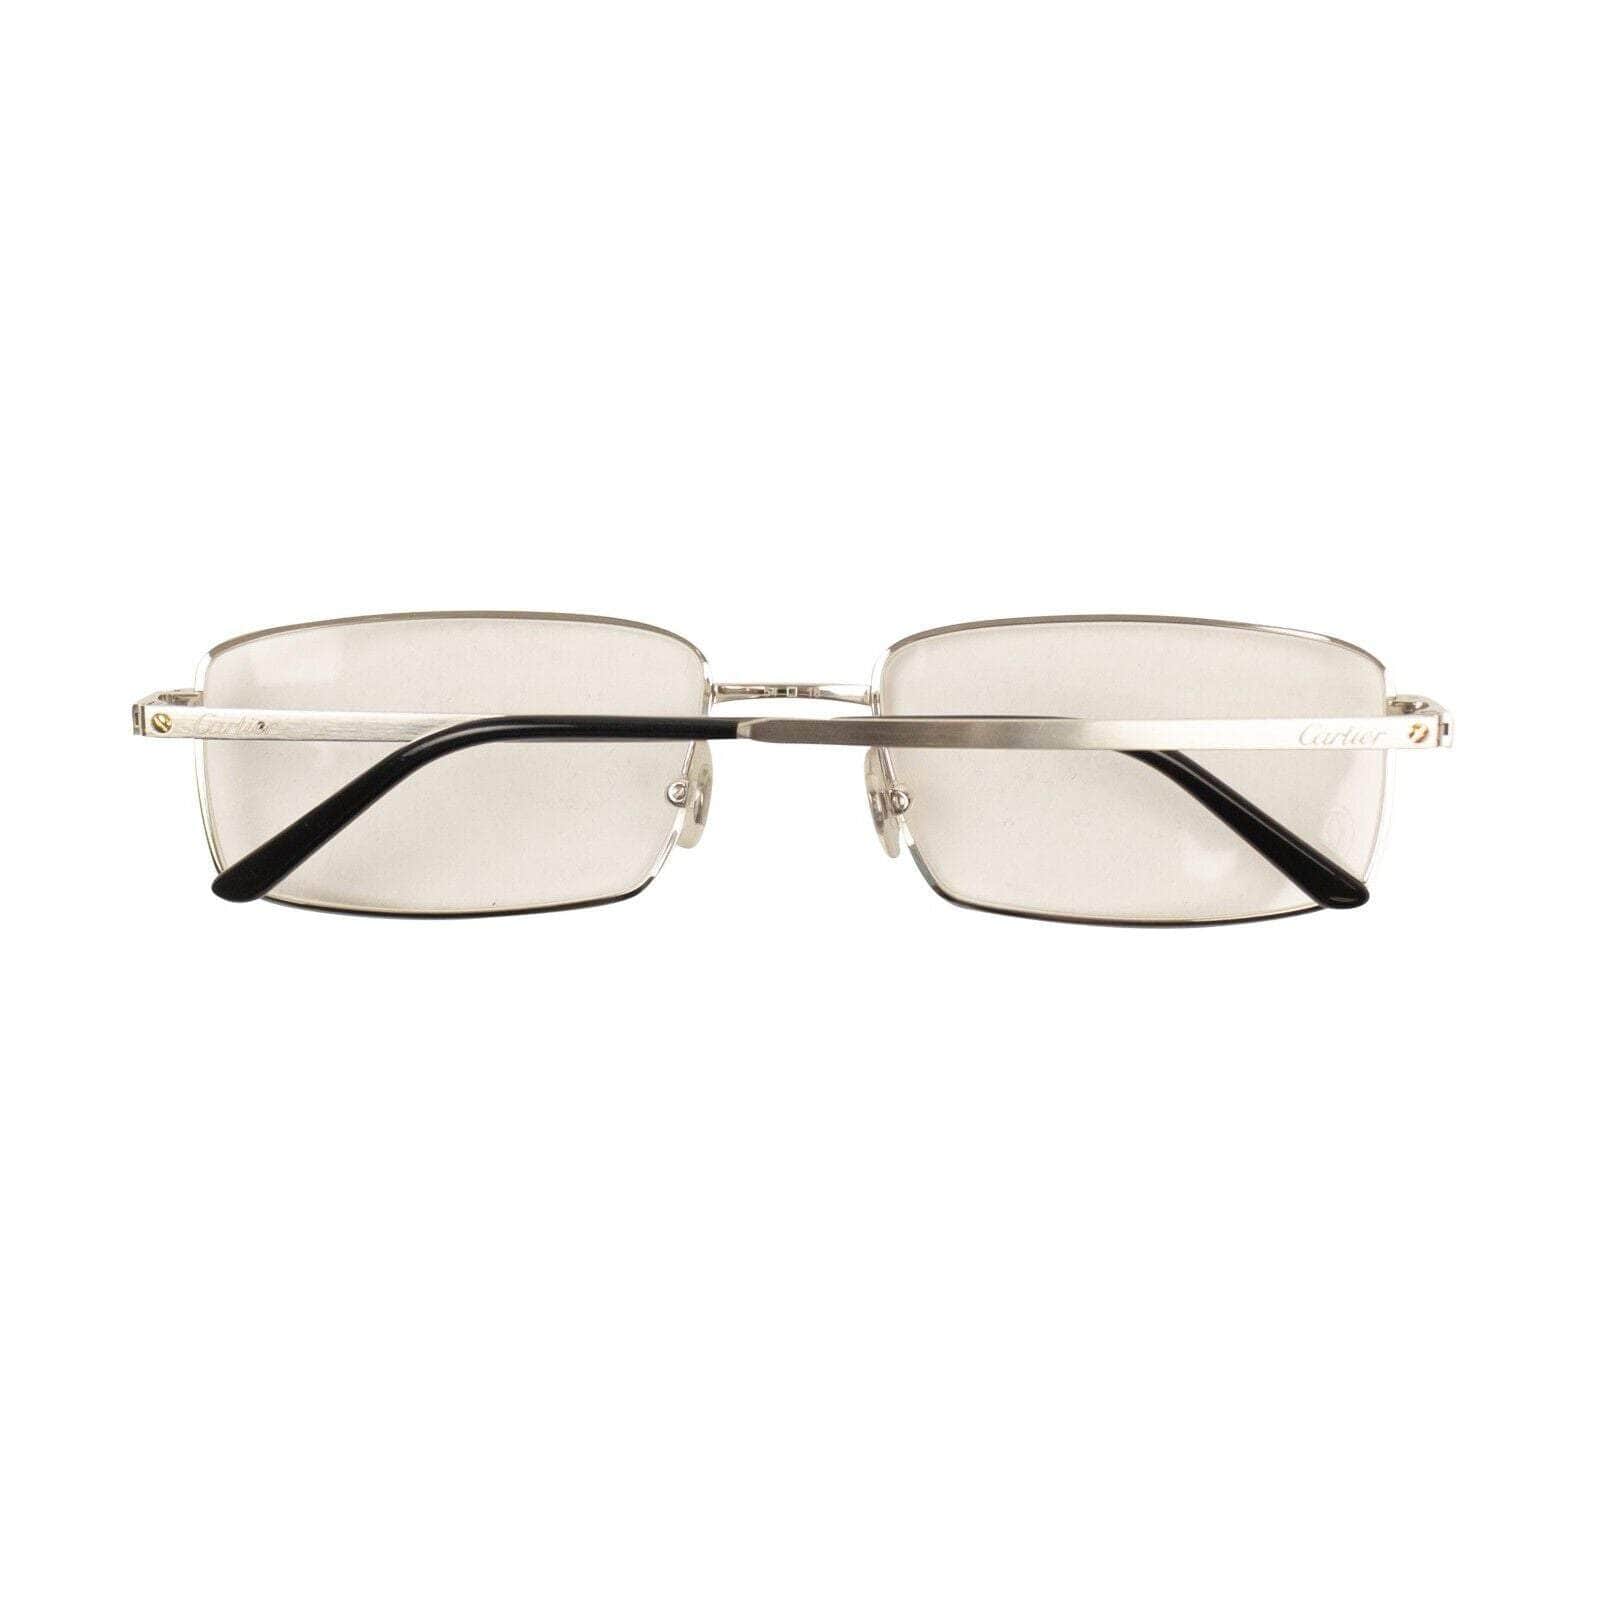 Cartier 1000-2000, channelenable-all, chicmi, couponcollection, gender-mens, main-accessories, mens-eyewear, mens-shoes, size-os OS Silver CT0085O-001 Rectangular Eyeglasses 95-CRT-3043/OS 95-CRT-3043/OS